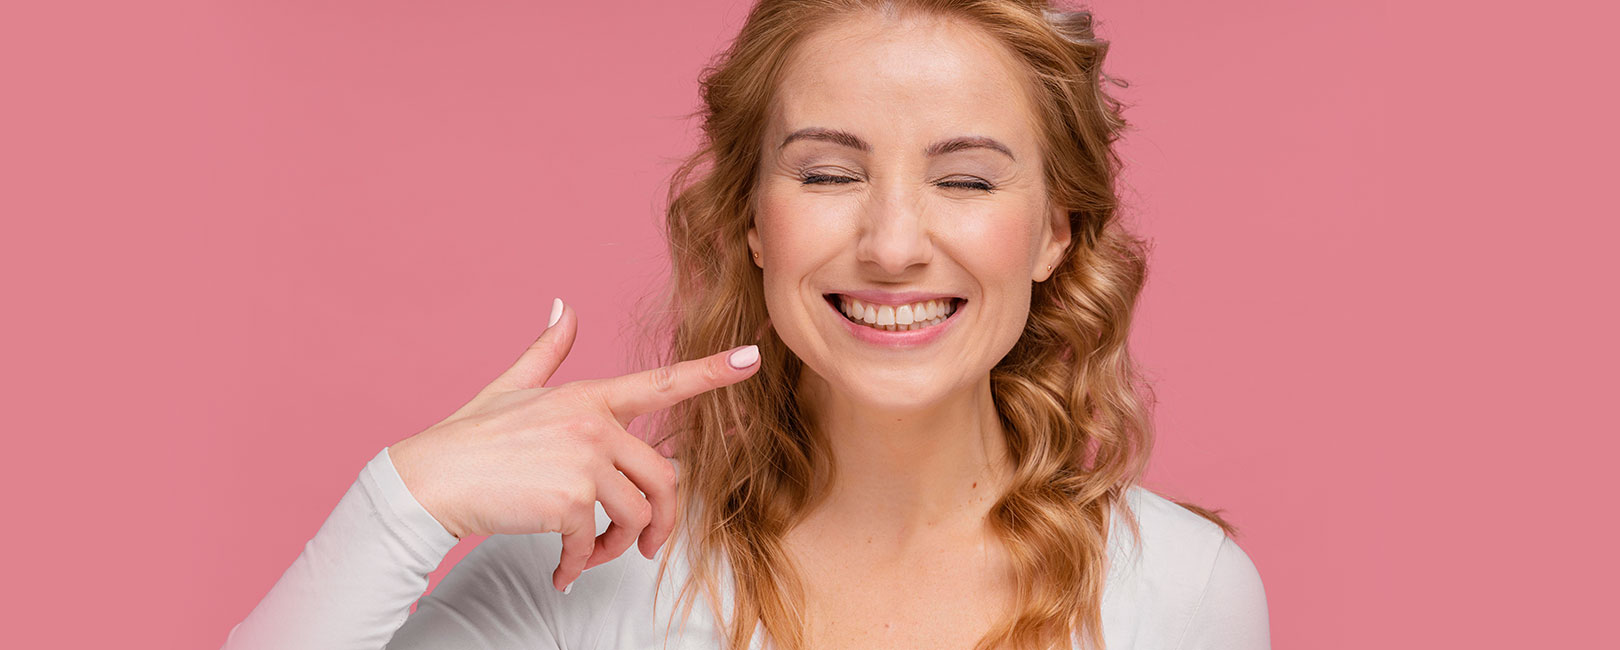 A woman is pointing to her teeth on a pink background, demonstrating how clear aligners work.